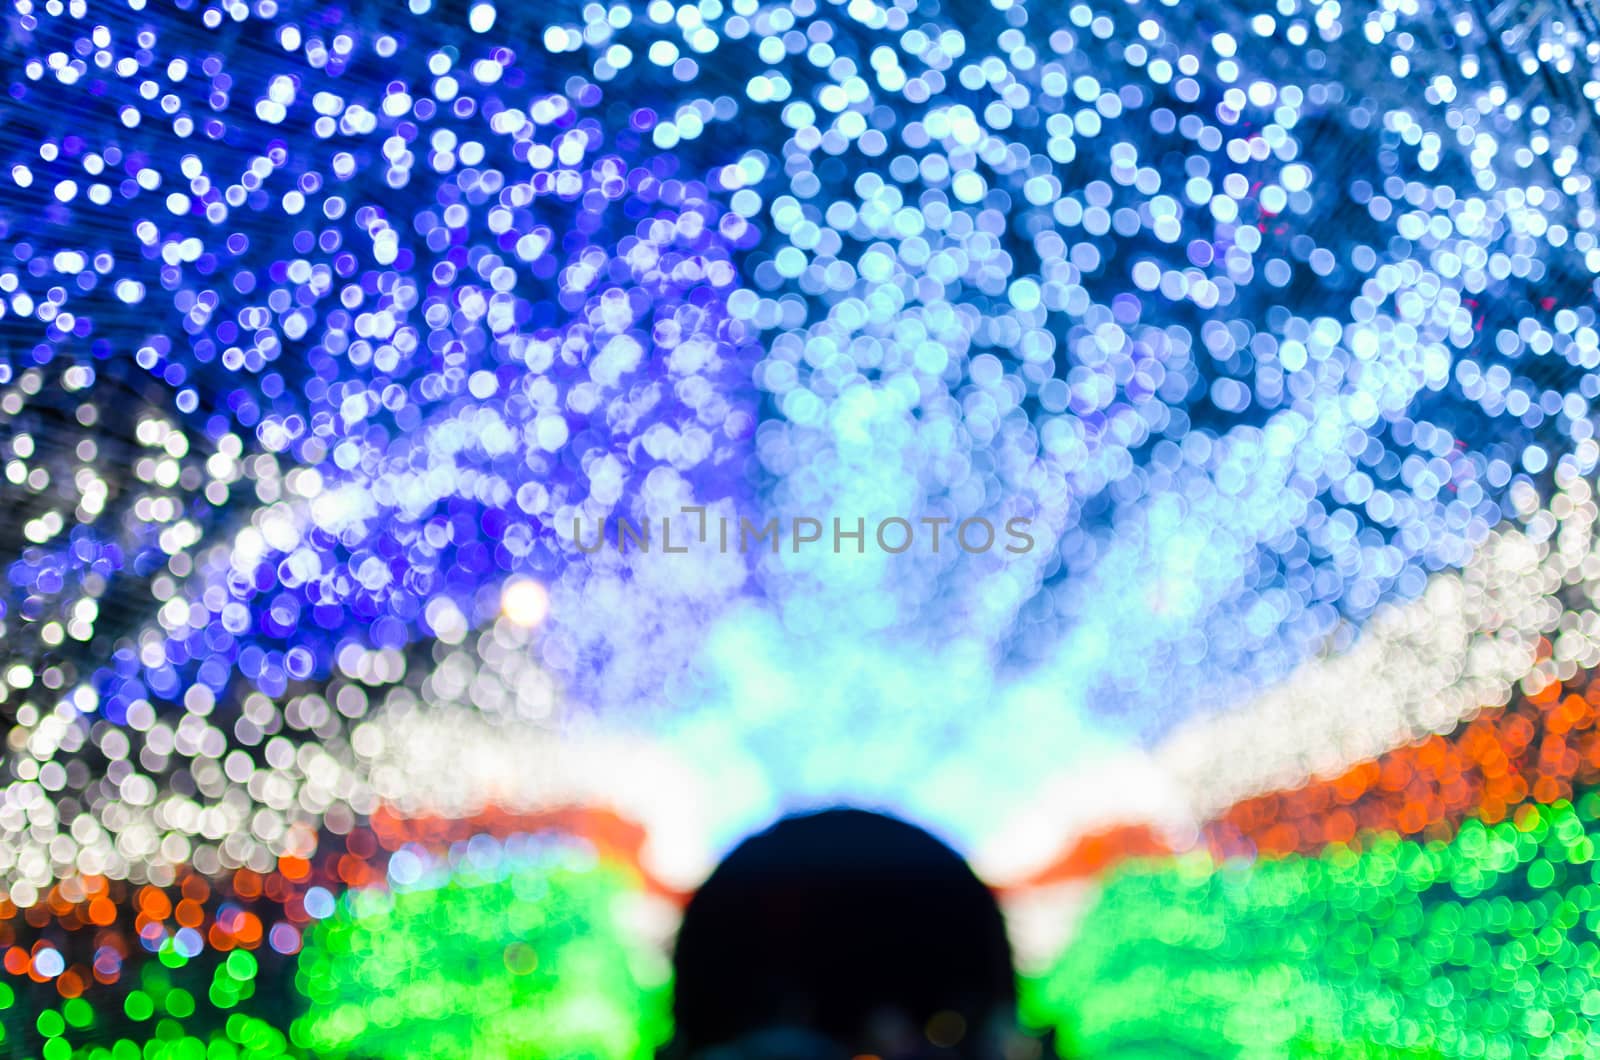 New year and christmas fastival LED light cave background . Elegant texture with blurred de focused lights